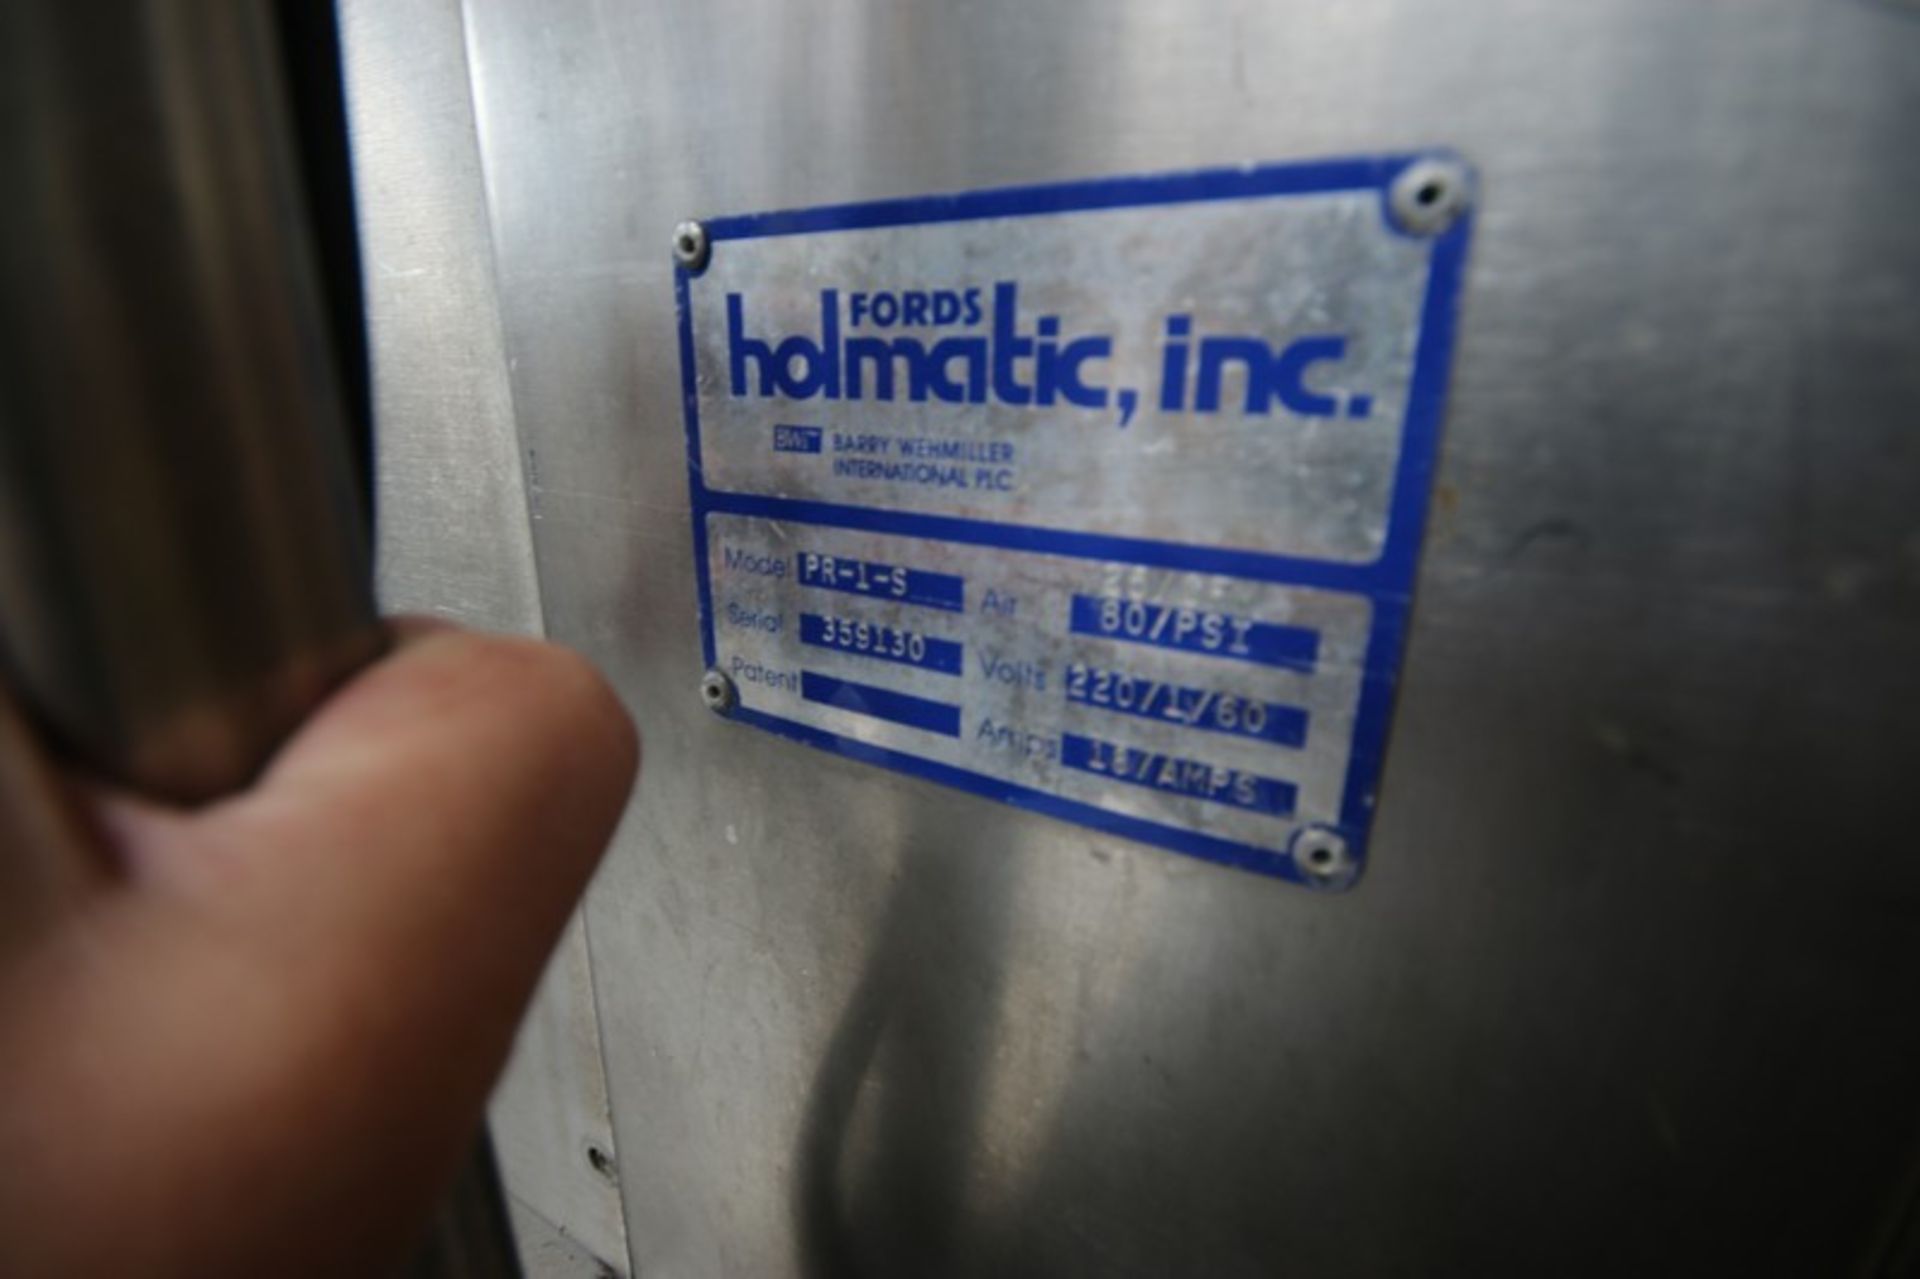 HOLMATIC BULK FILLER, MODEL PR-1-S, S/N 359130, FILLS 5LB AND 40 OZ, TWO SIZE CUPS 513 AND 502 MM, - Image 3 of 9